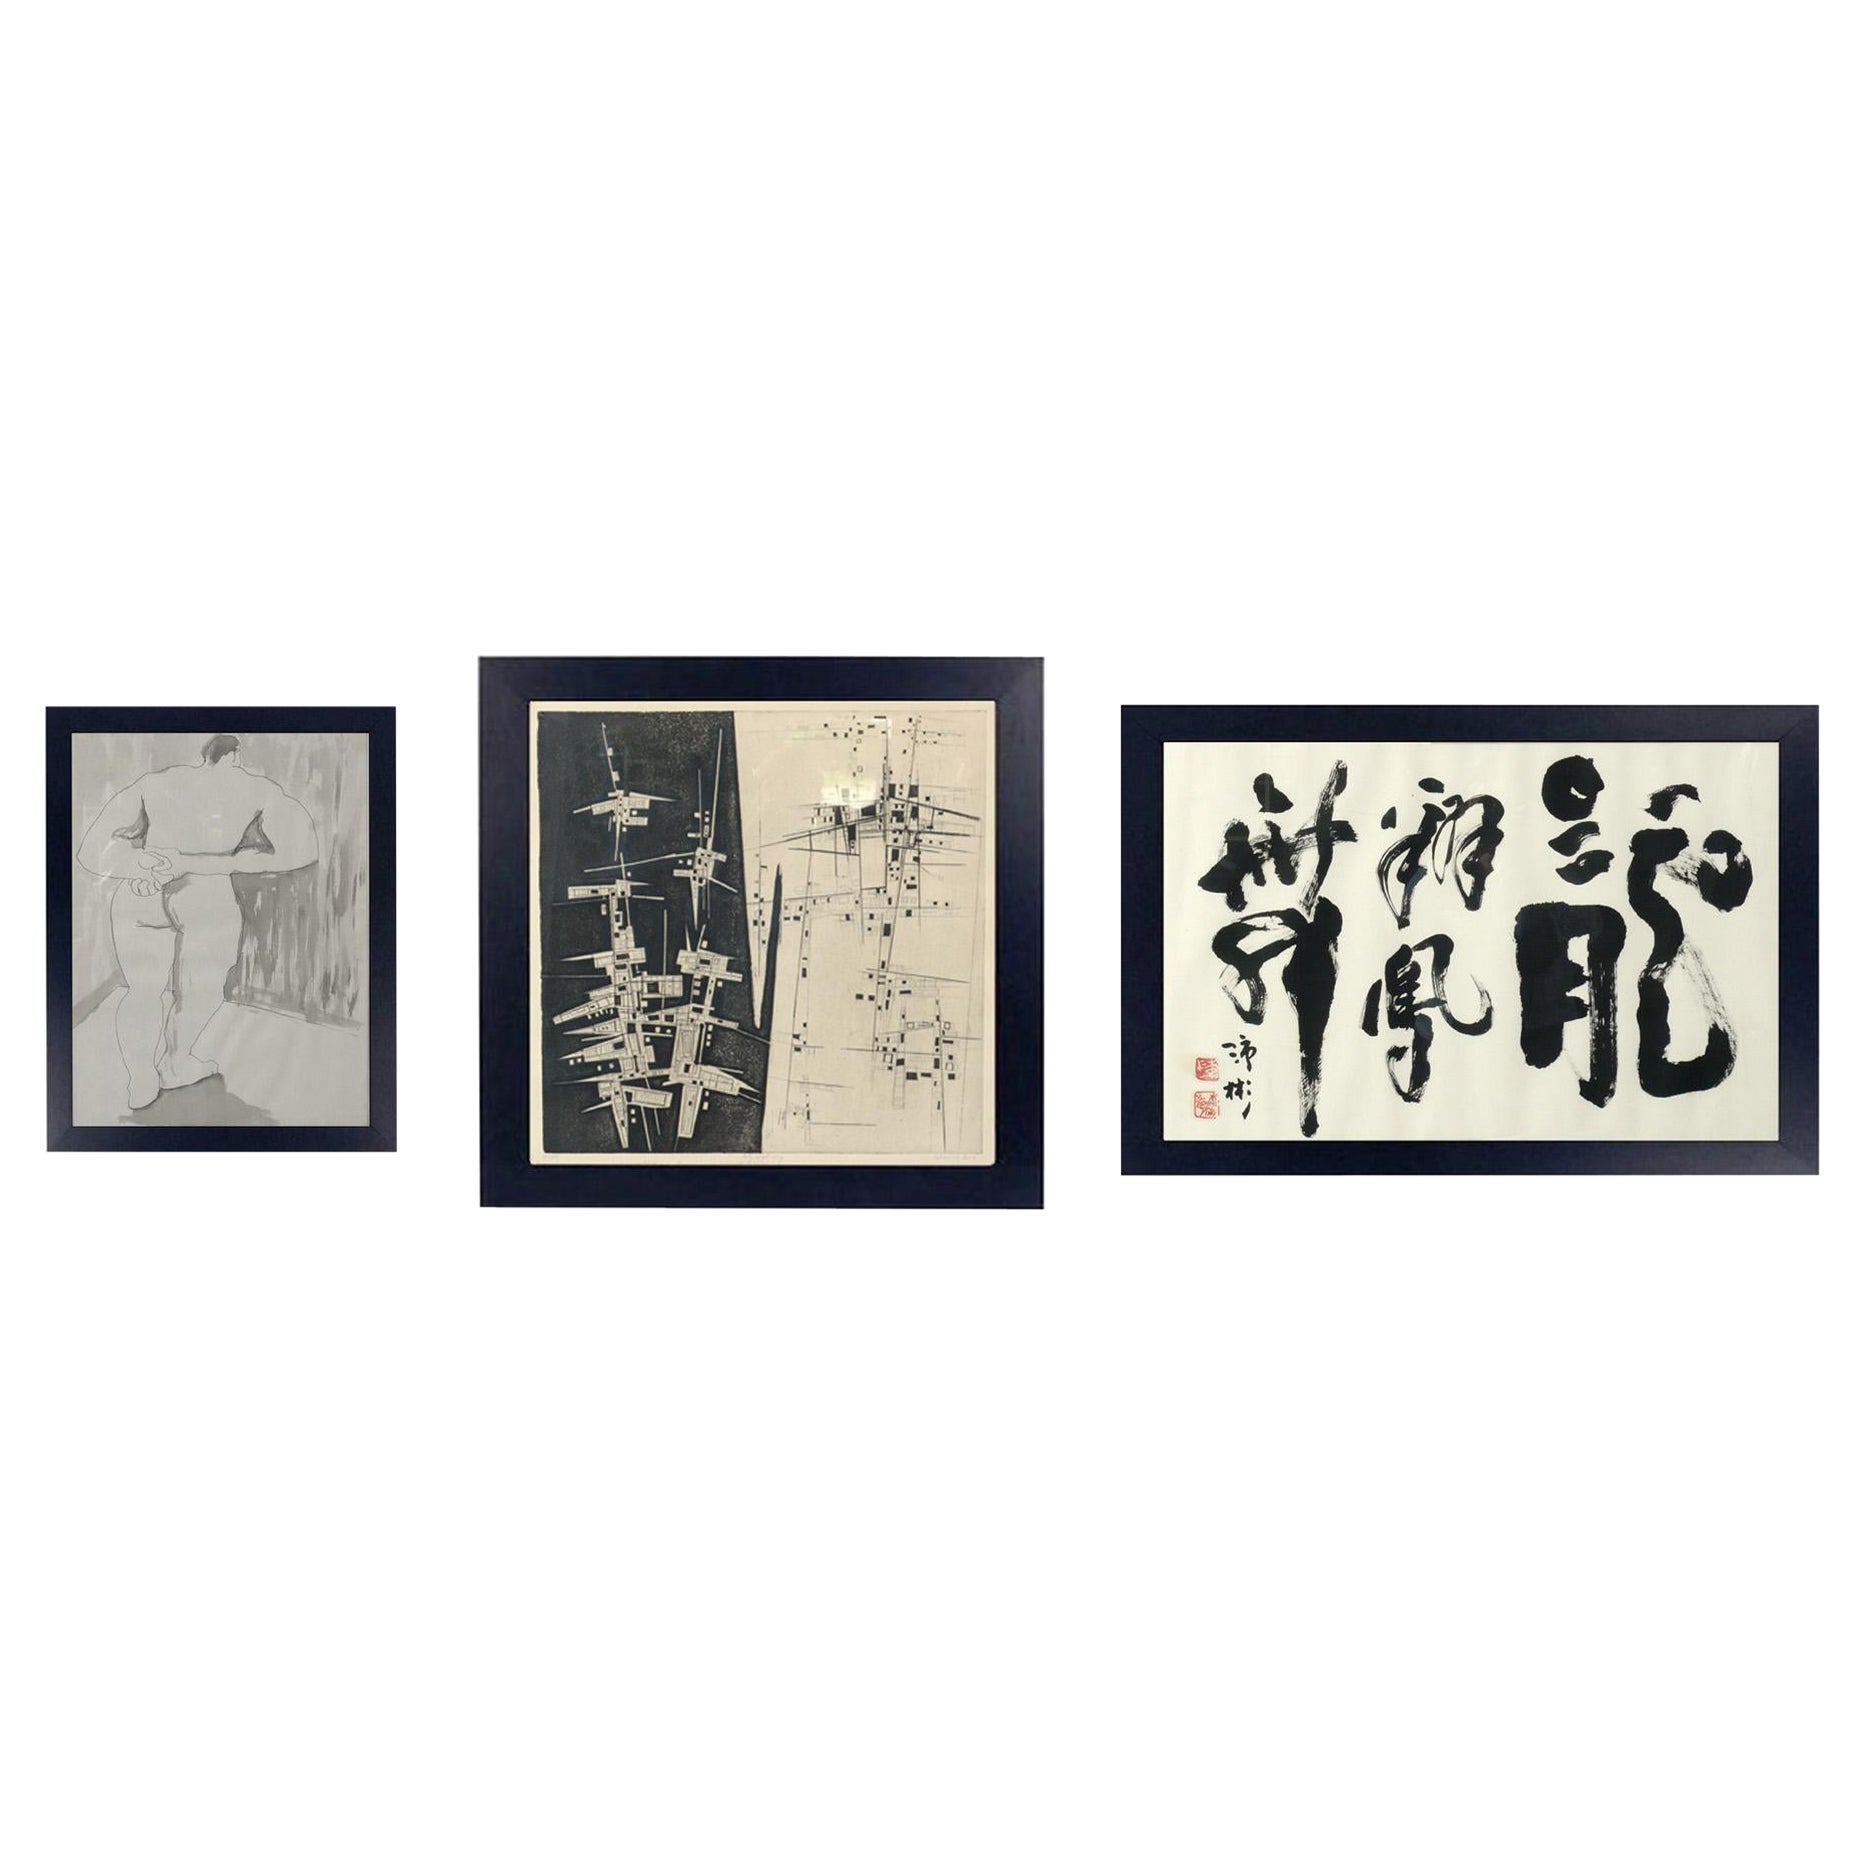 Selection of Black and White Art